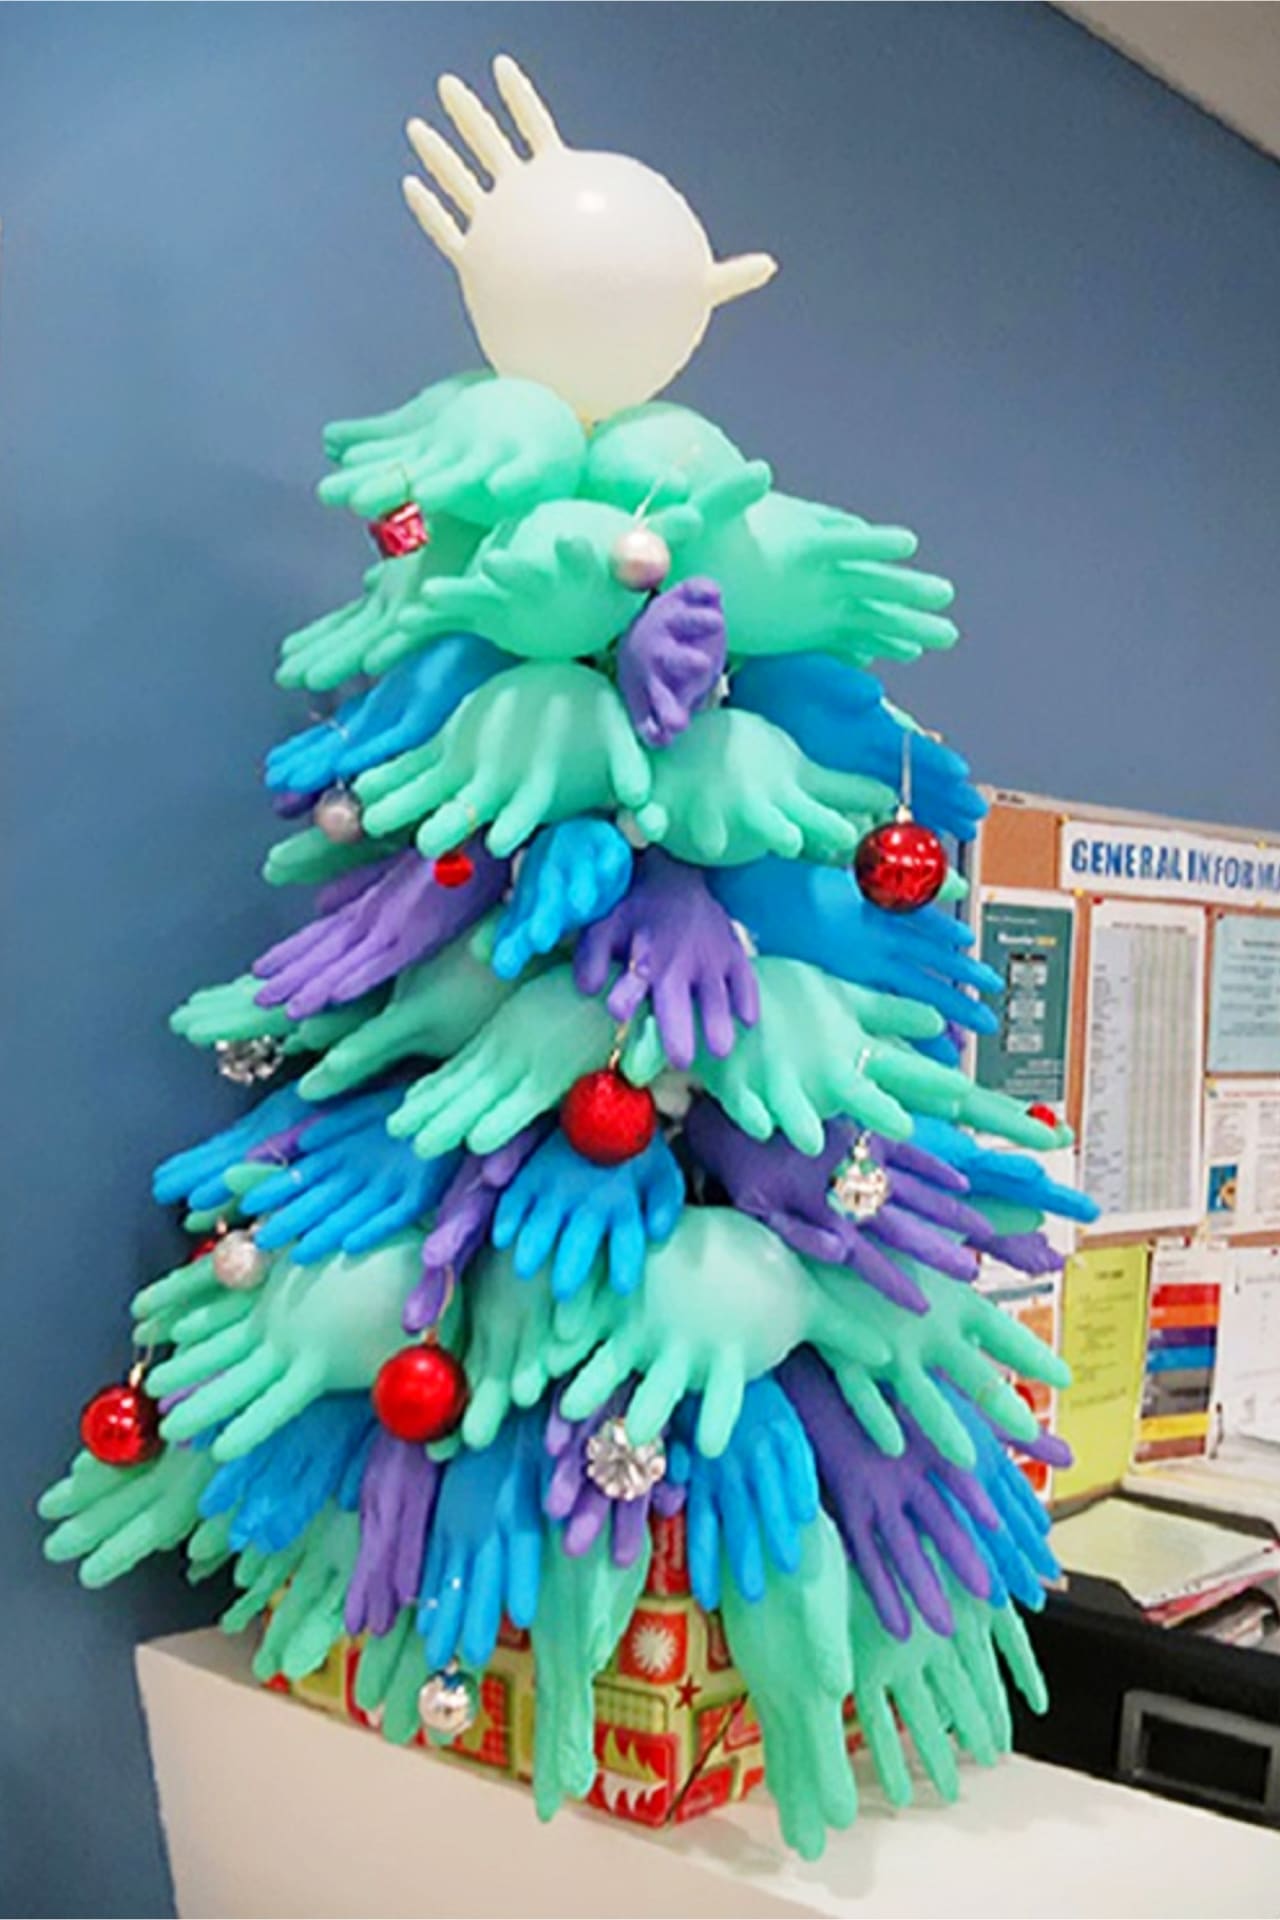 Christmas decorating ideas for doctor's office or dentists office - DIY Christmas decorations - Christmas tree made out of doctor's gloves